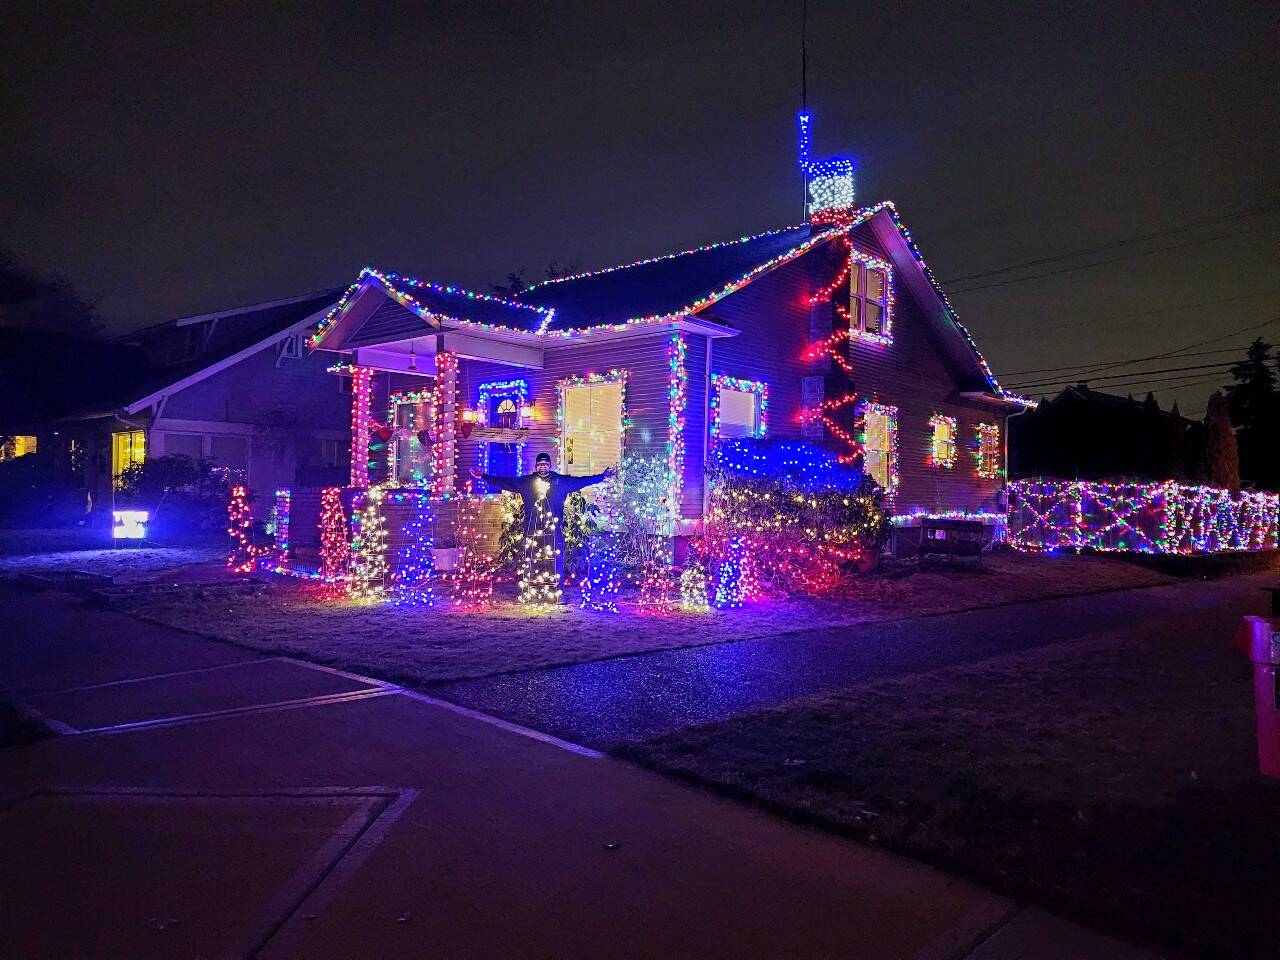 Photo courtesy of Ricky Taff
Ricky Taff has been lighting up his Auburn neighborhood with his Christmas light displays for years, but this year he’s adding to the mix thousands of additional lights, music, and a food drive in conjunction with the Auburn Food Bank.